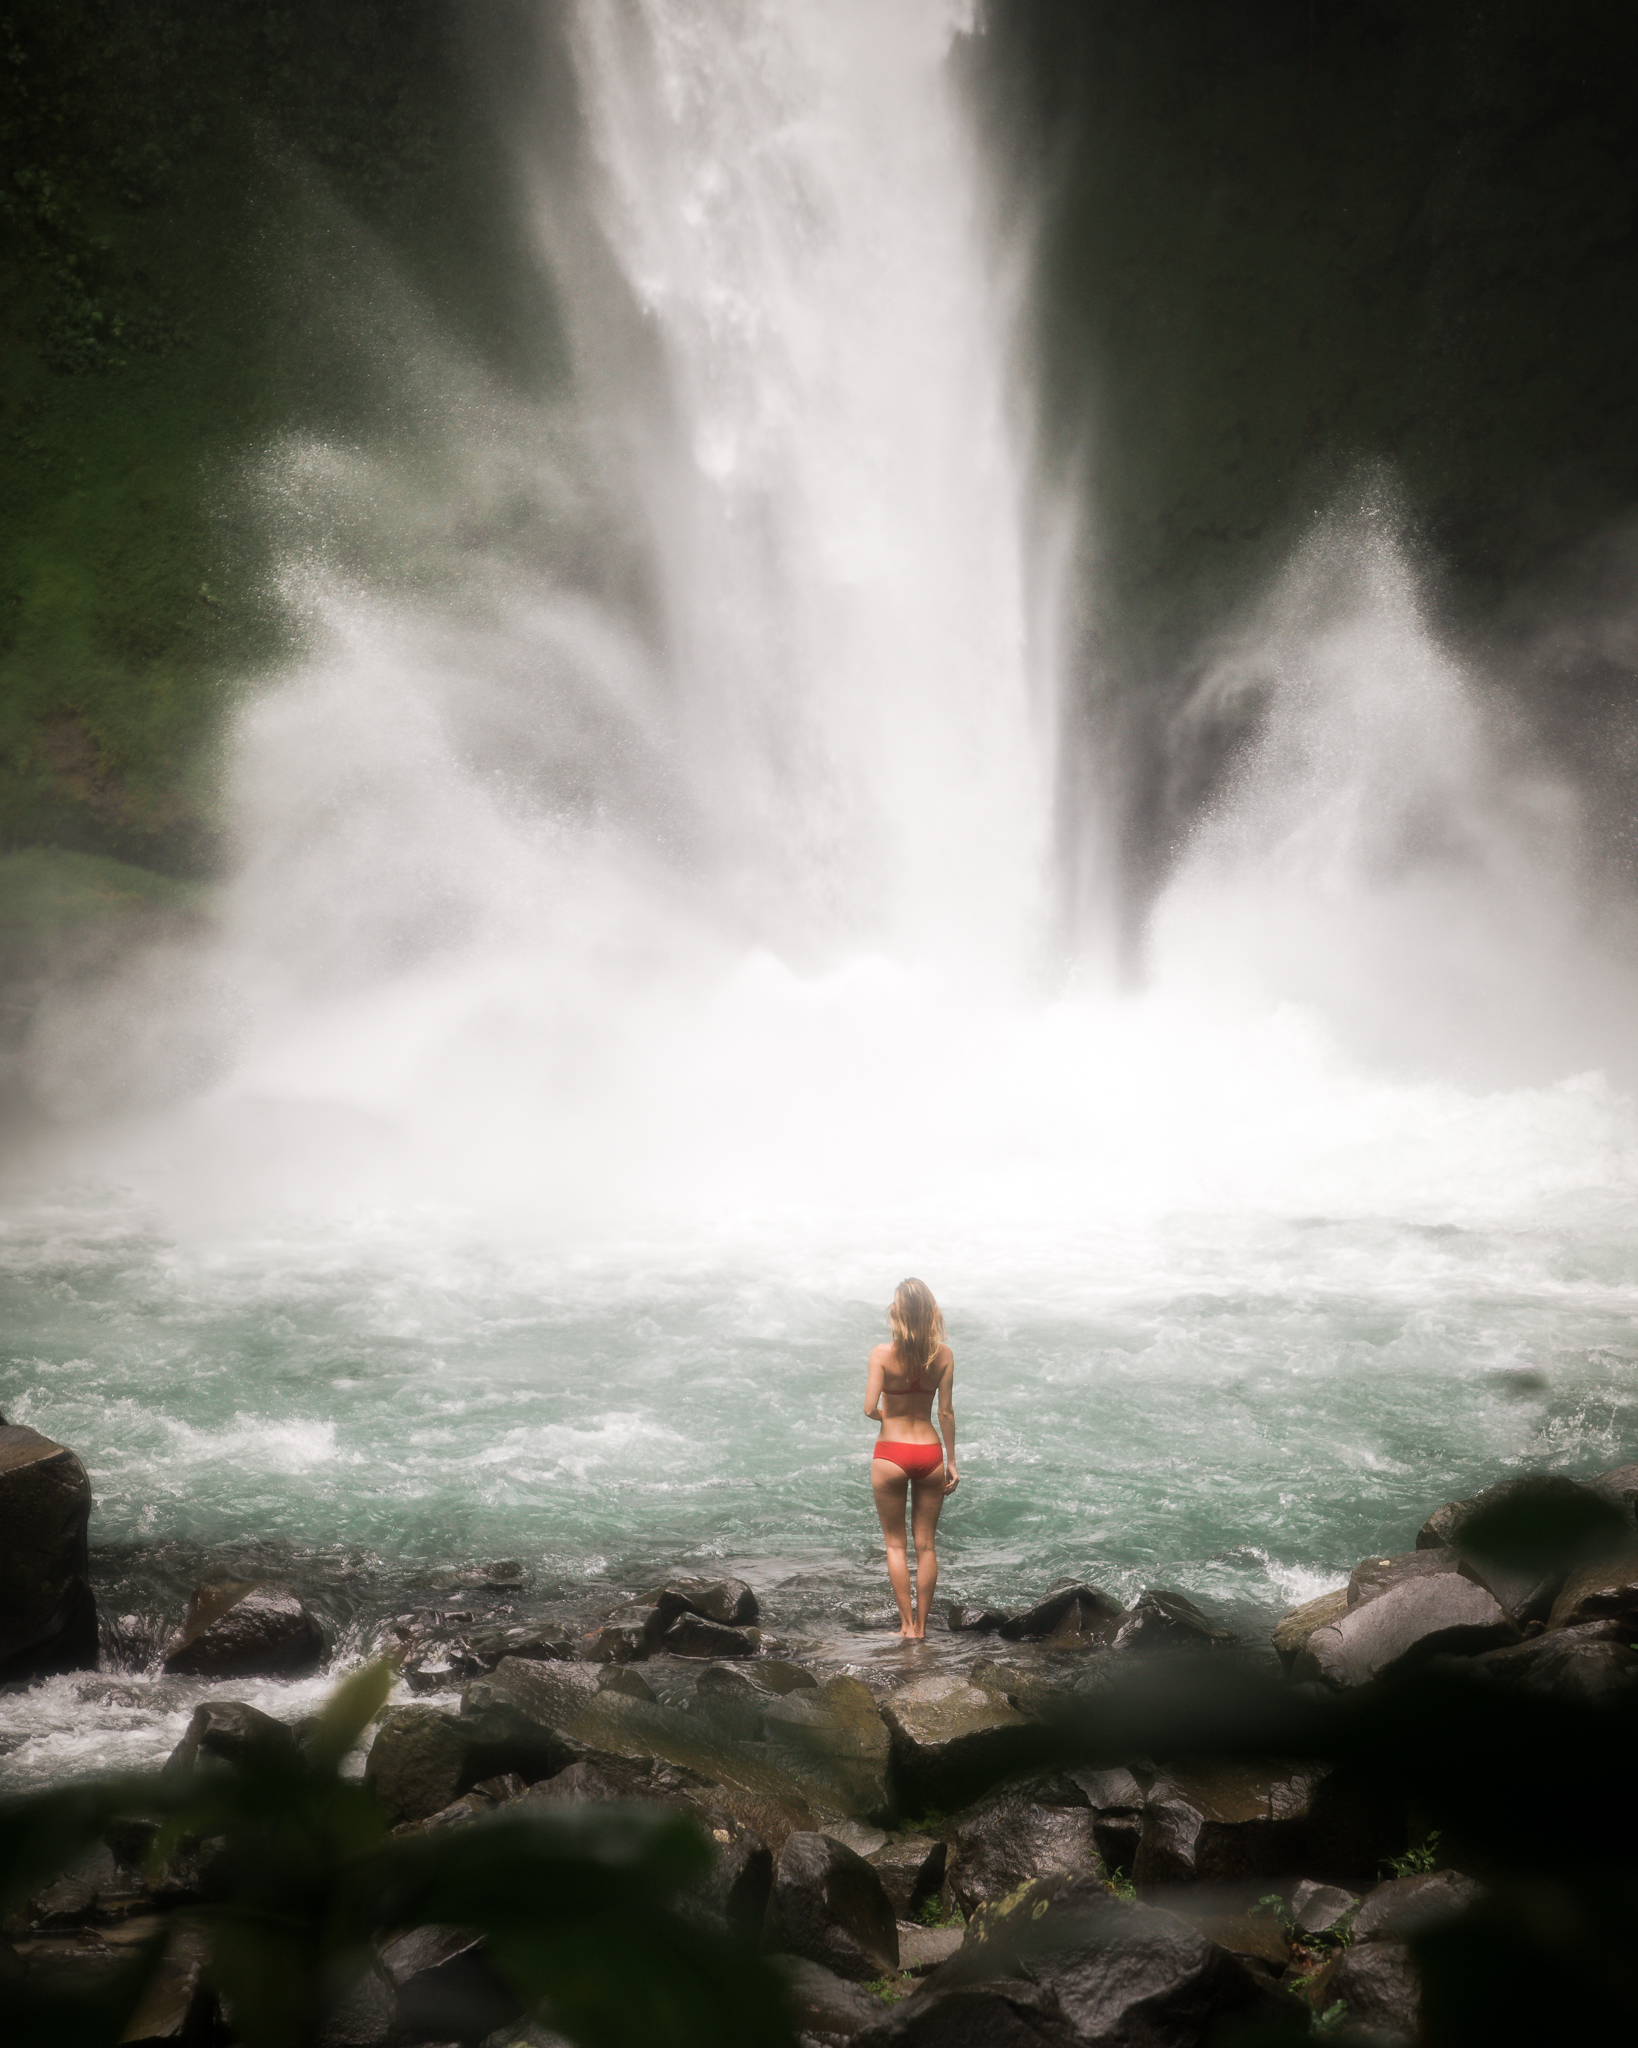 La Fortuna Waterfall, Costa Rica. You aren’t allowed to swim to near the waterfall, but it’s popular to cool down in the water down steam.